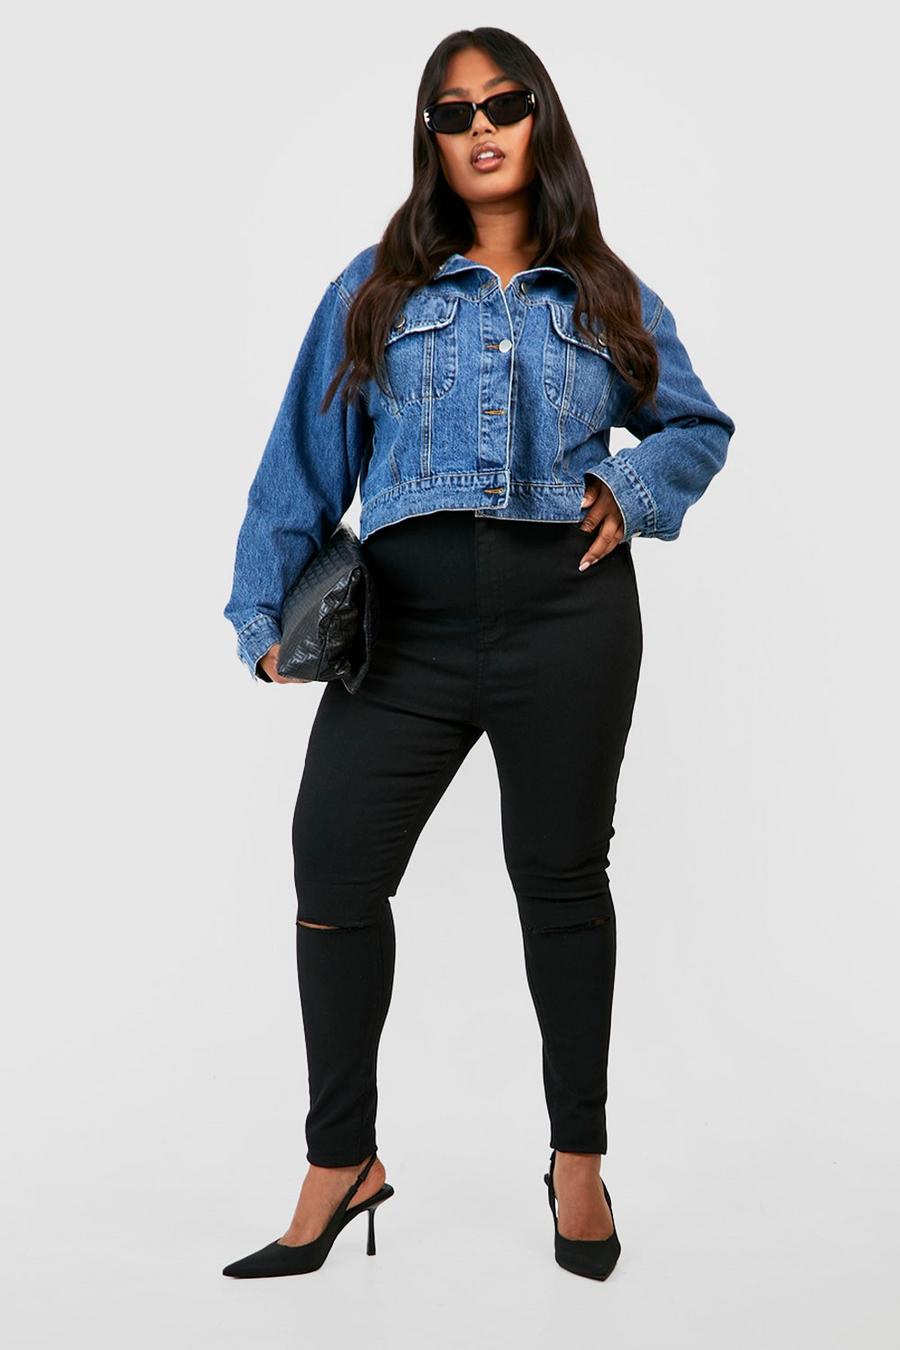 Plus Size Party Outfits | Plus Size Birthday Outfits | boohoo USA